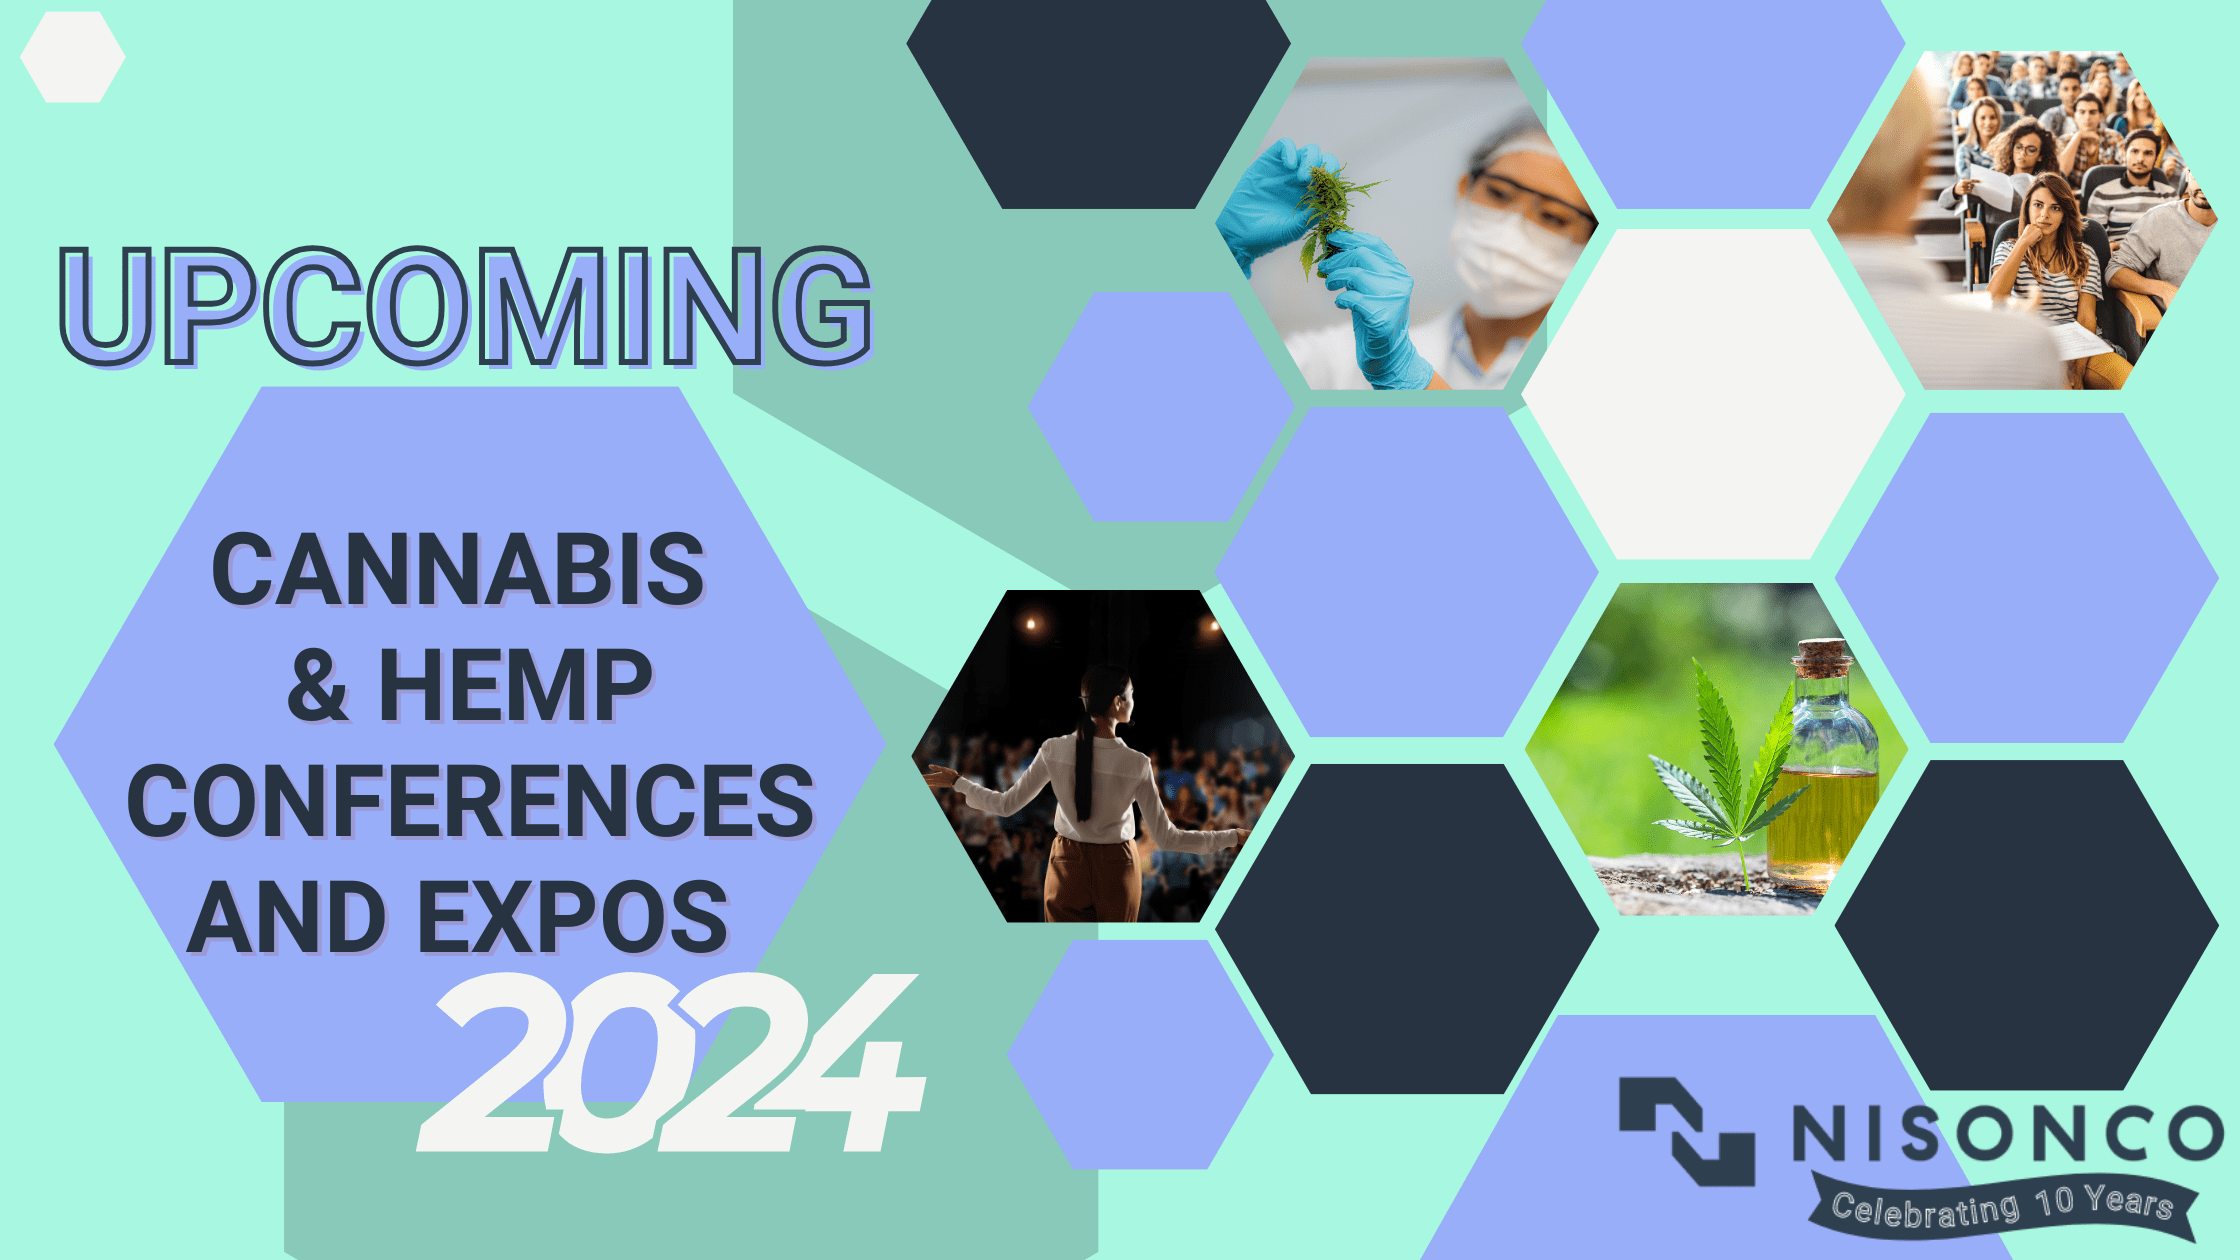 The text 'Upcoming Cannabis & Hemp Conferences and Expos 2024' appears to the left of a series of trade show images, including speakers, attendees, cannabis in a lab setting and cannabis leaves